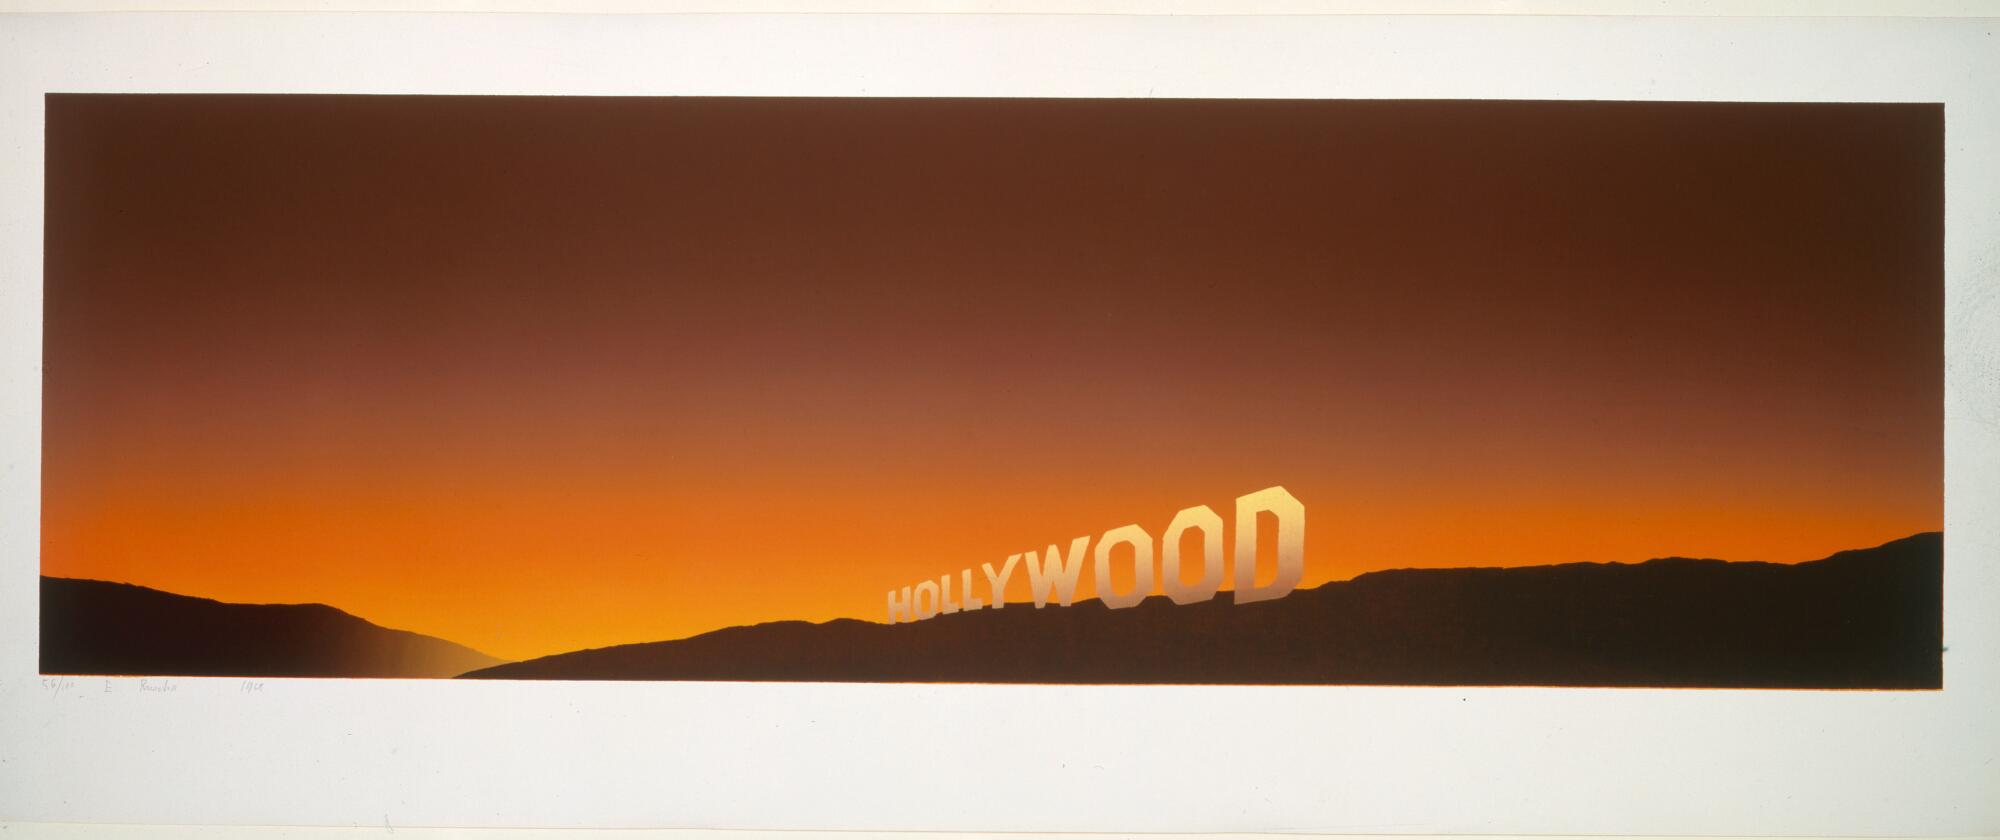 Hollywood sign Ed Ruscha, Hollywood, 1968, Los Angeles County Museum of Art, Museum Acquisition Fund,  Ed Ruscha, photo